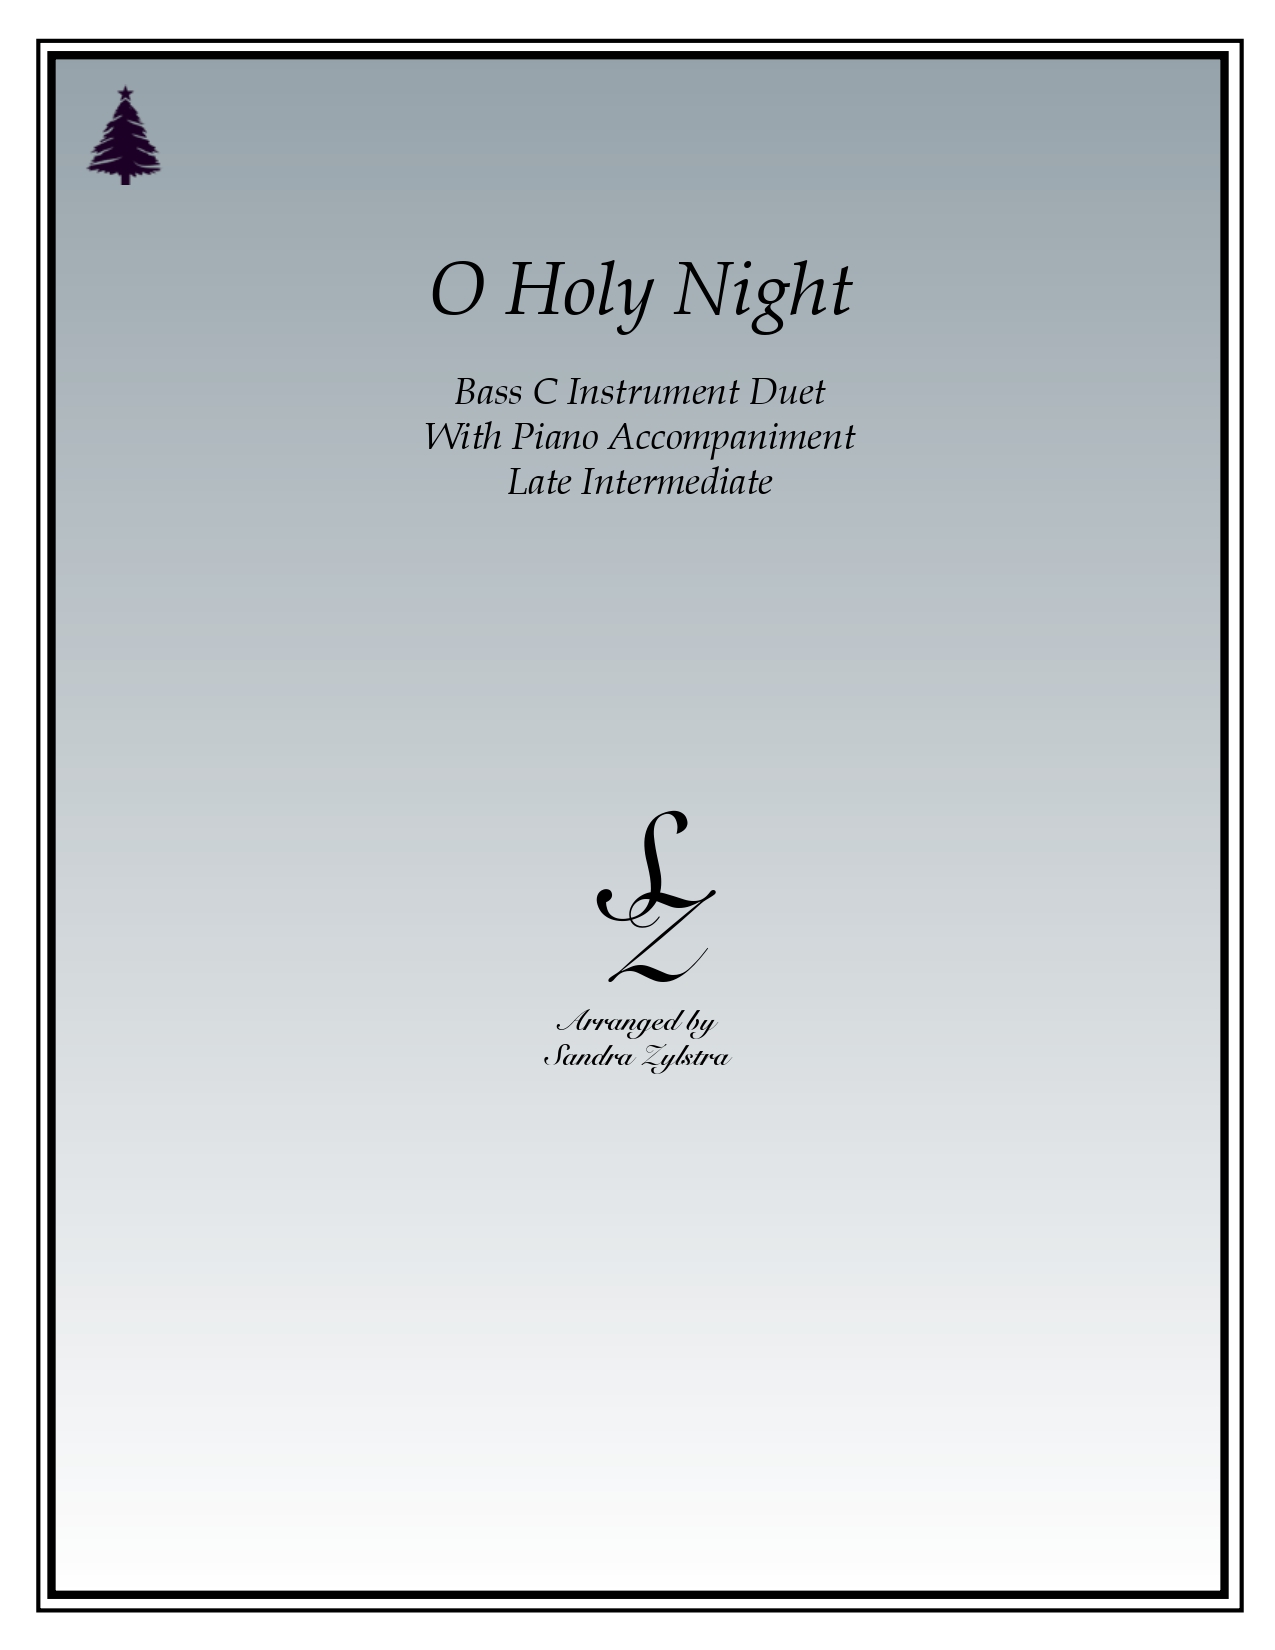 O Holy Night bass C instrument duet part cover page 00011